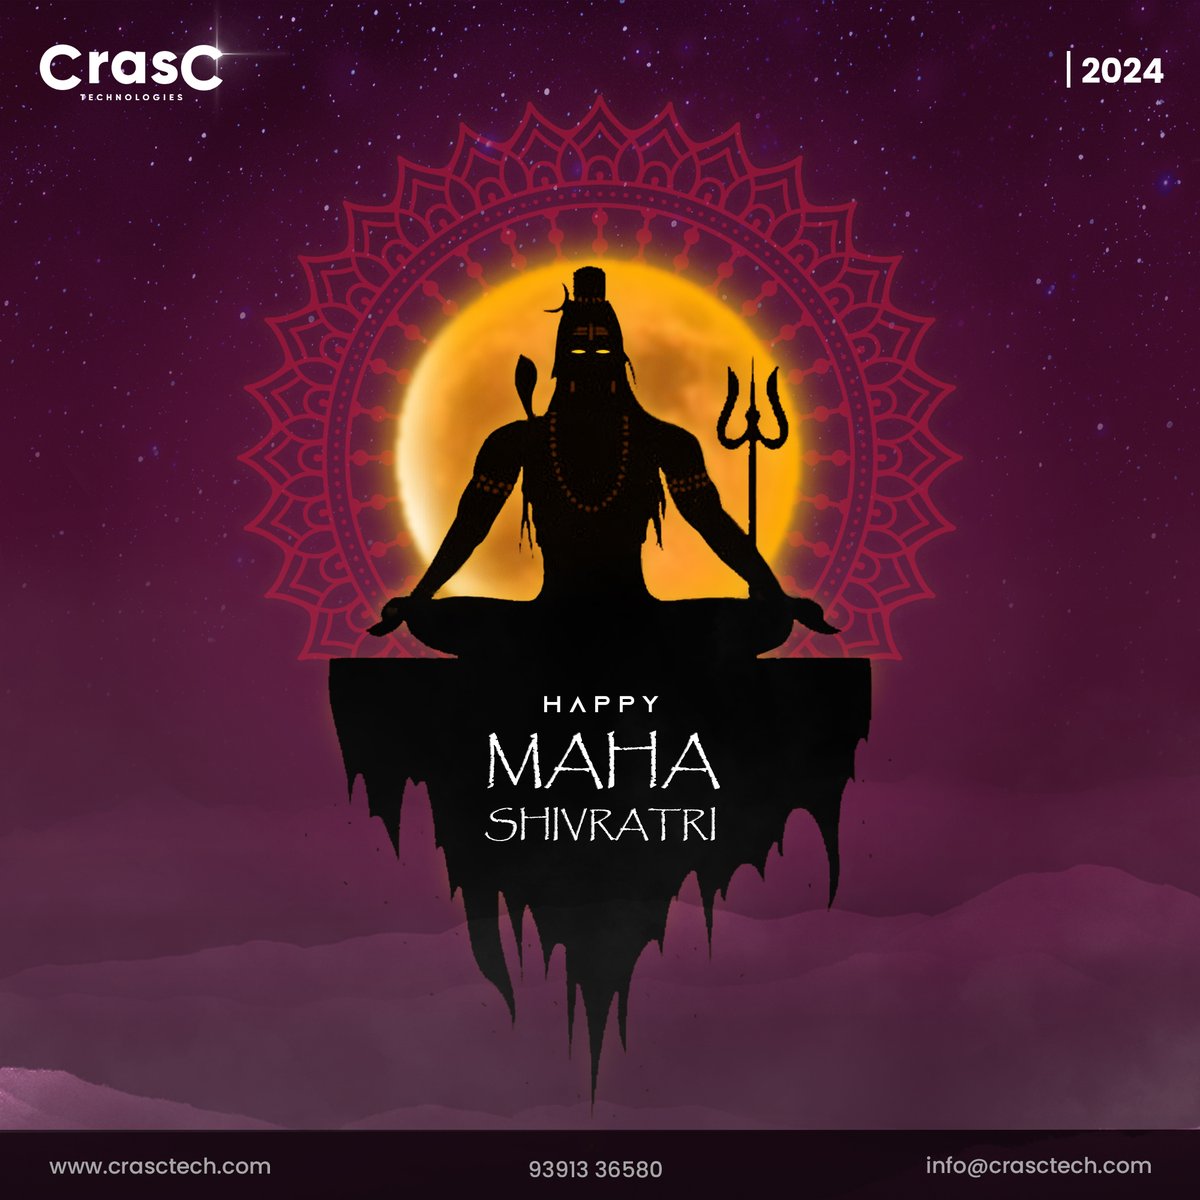 🕉️ May the divine energy of Shivaratri renew your spirit and bring positivity to your journey. 🌌 🙏 Happy Shivaratri from Crasctech! 🌺 #crasctech #digitalmarketing #digitalmarketing #socialmediamarketing #mahasivaratri #mahasivaratri2024 #indianfestival #LordShiva